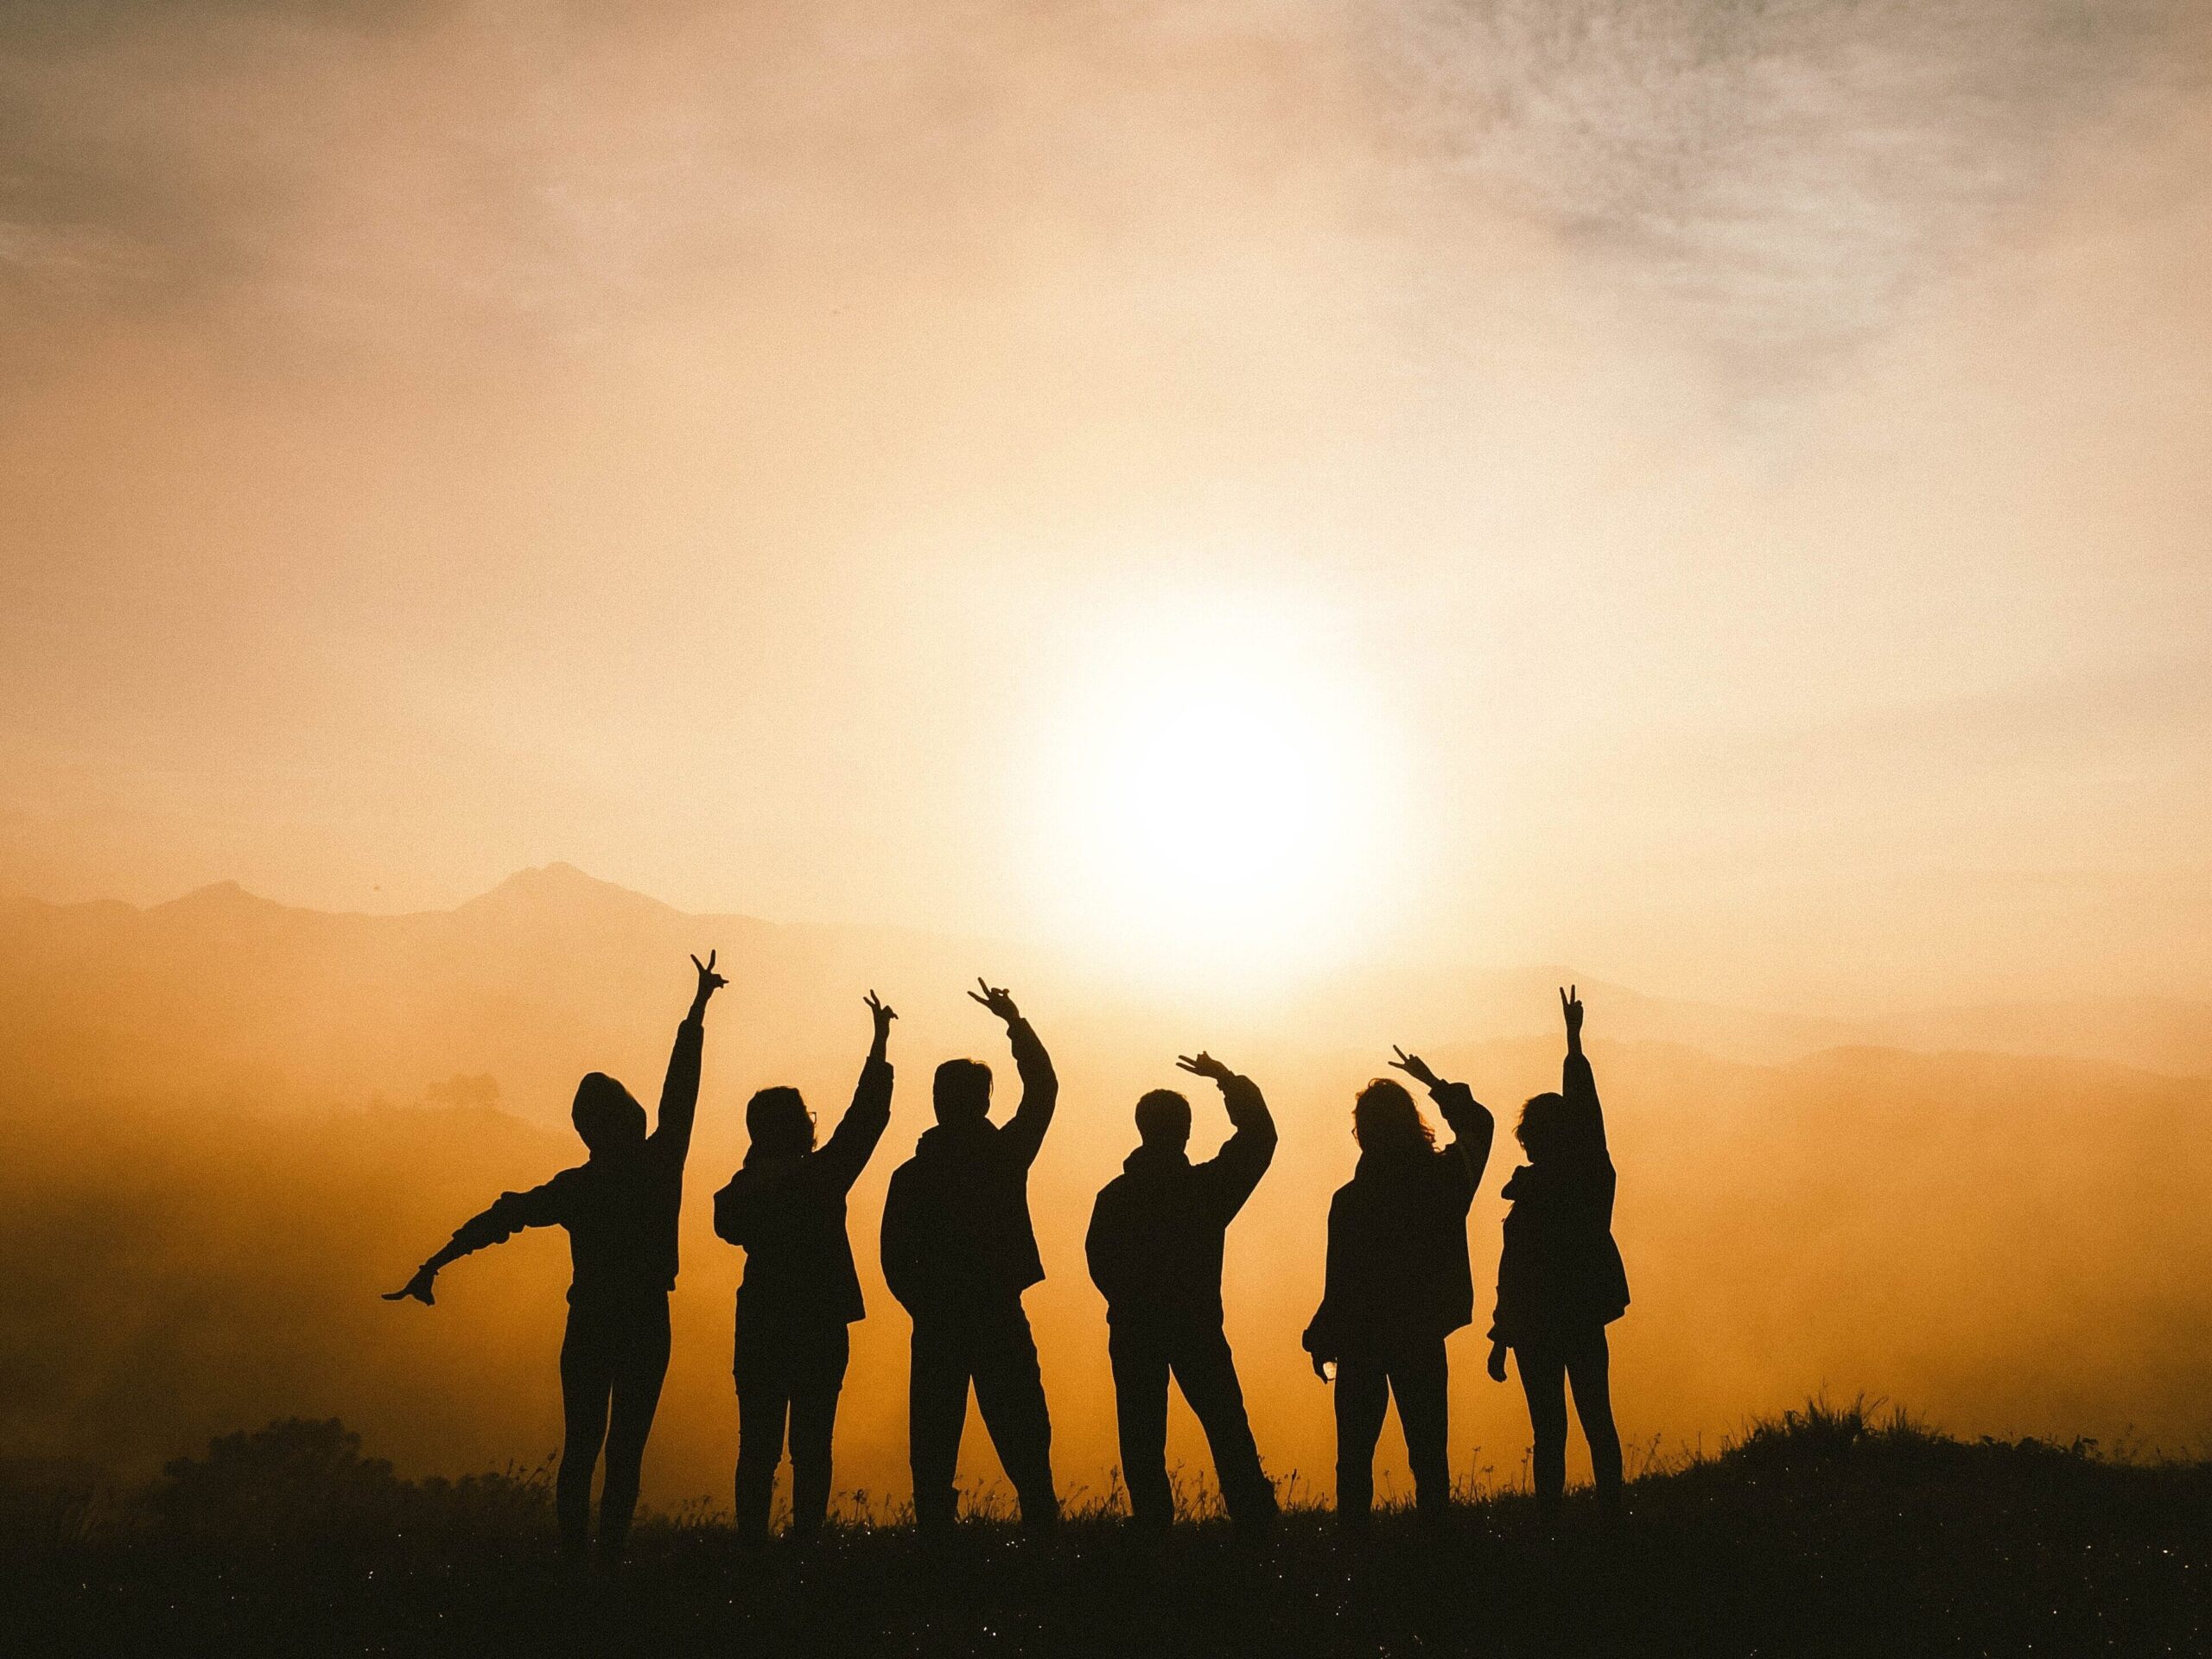 The sun is setting behind mountains letting off an orange light. 6 people stand in silhouette with one arm extended above their heads displaying the peace sign.